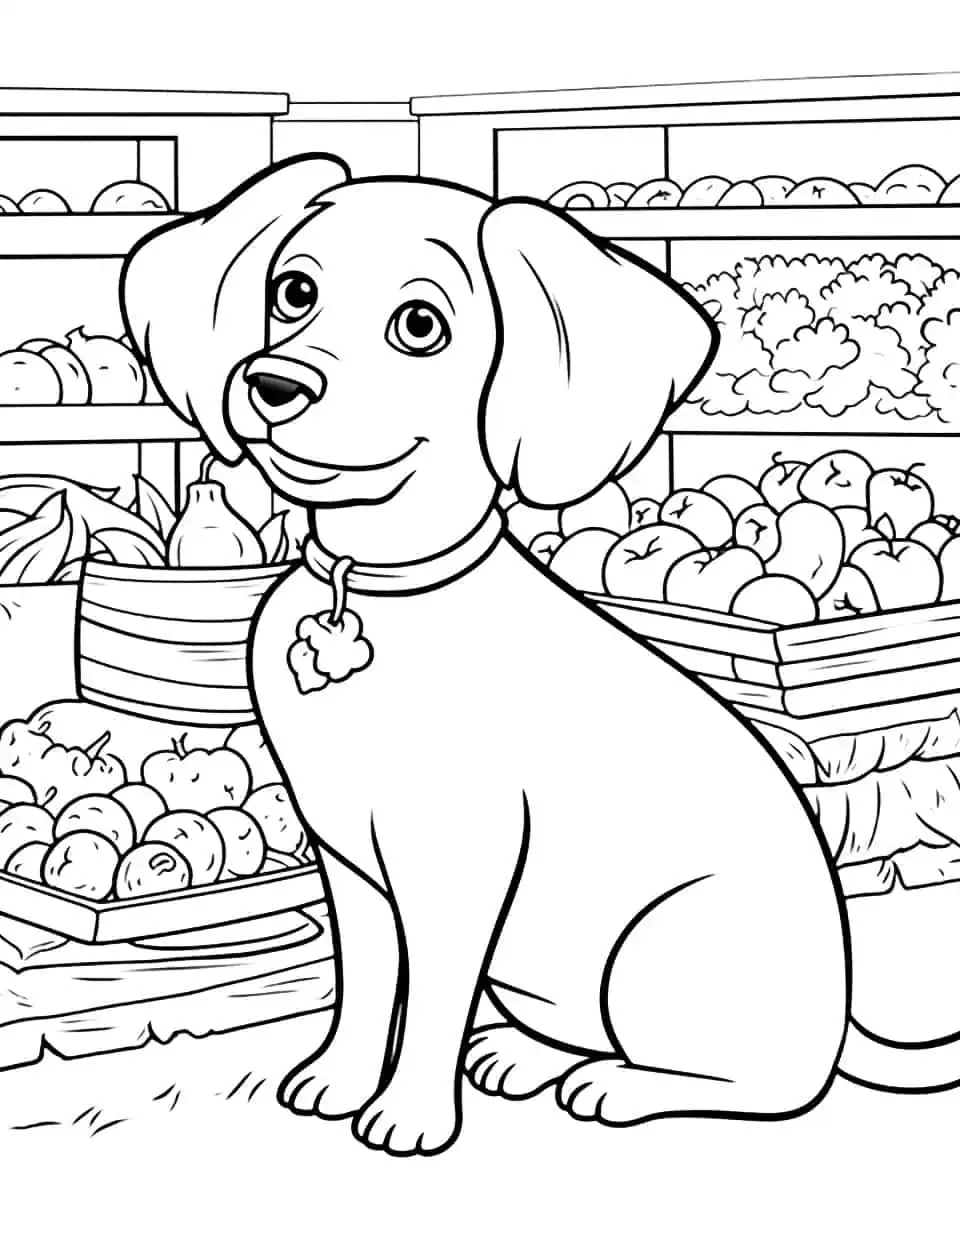 Dog coloring pages free printable sheets